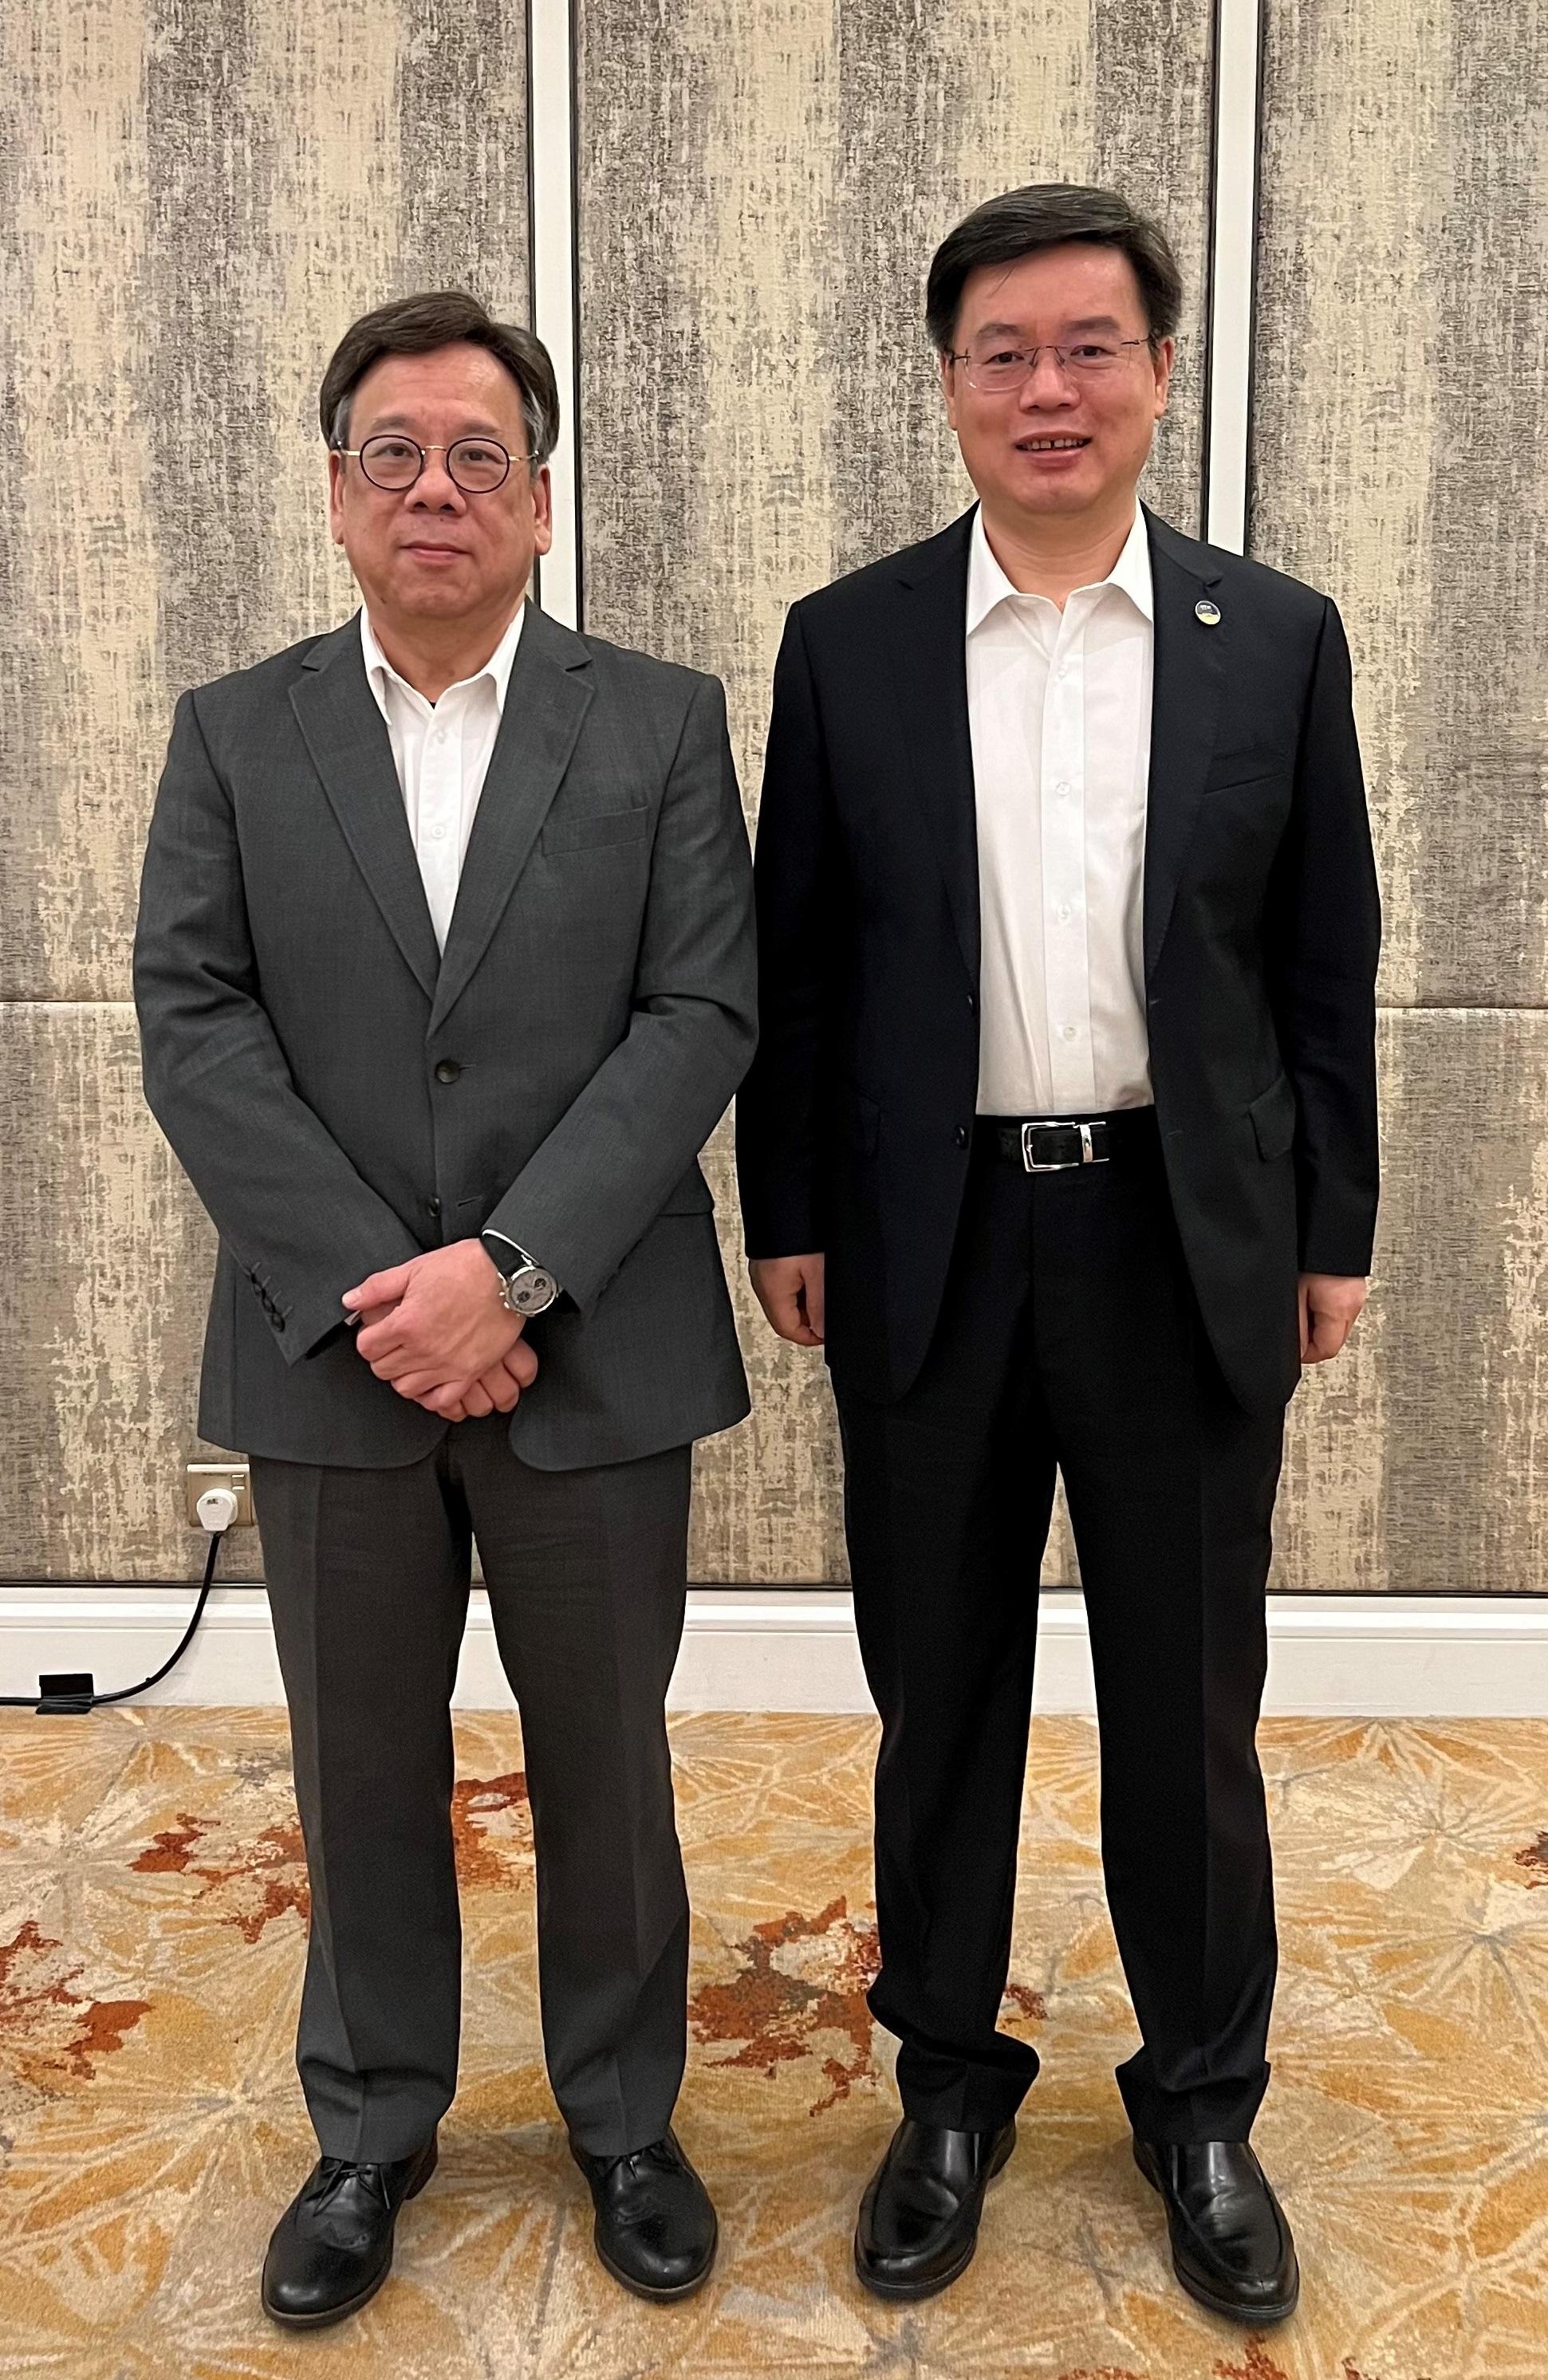 The Secretary for Commerce and Economic Development, Mr Algernon Yau (left), meets with the Mayor of the Shenzhen Municipal People's Government, Mr Qin Weizhong (right), in Kuala Lumpur, Malaysia, today (September 21) to exchange views on further enhancing co-operation between Hong Kong and Shenzhen.